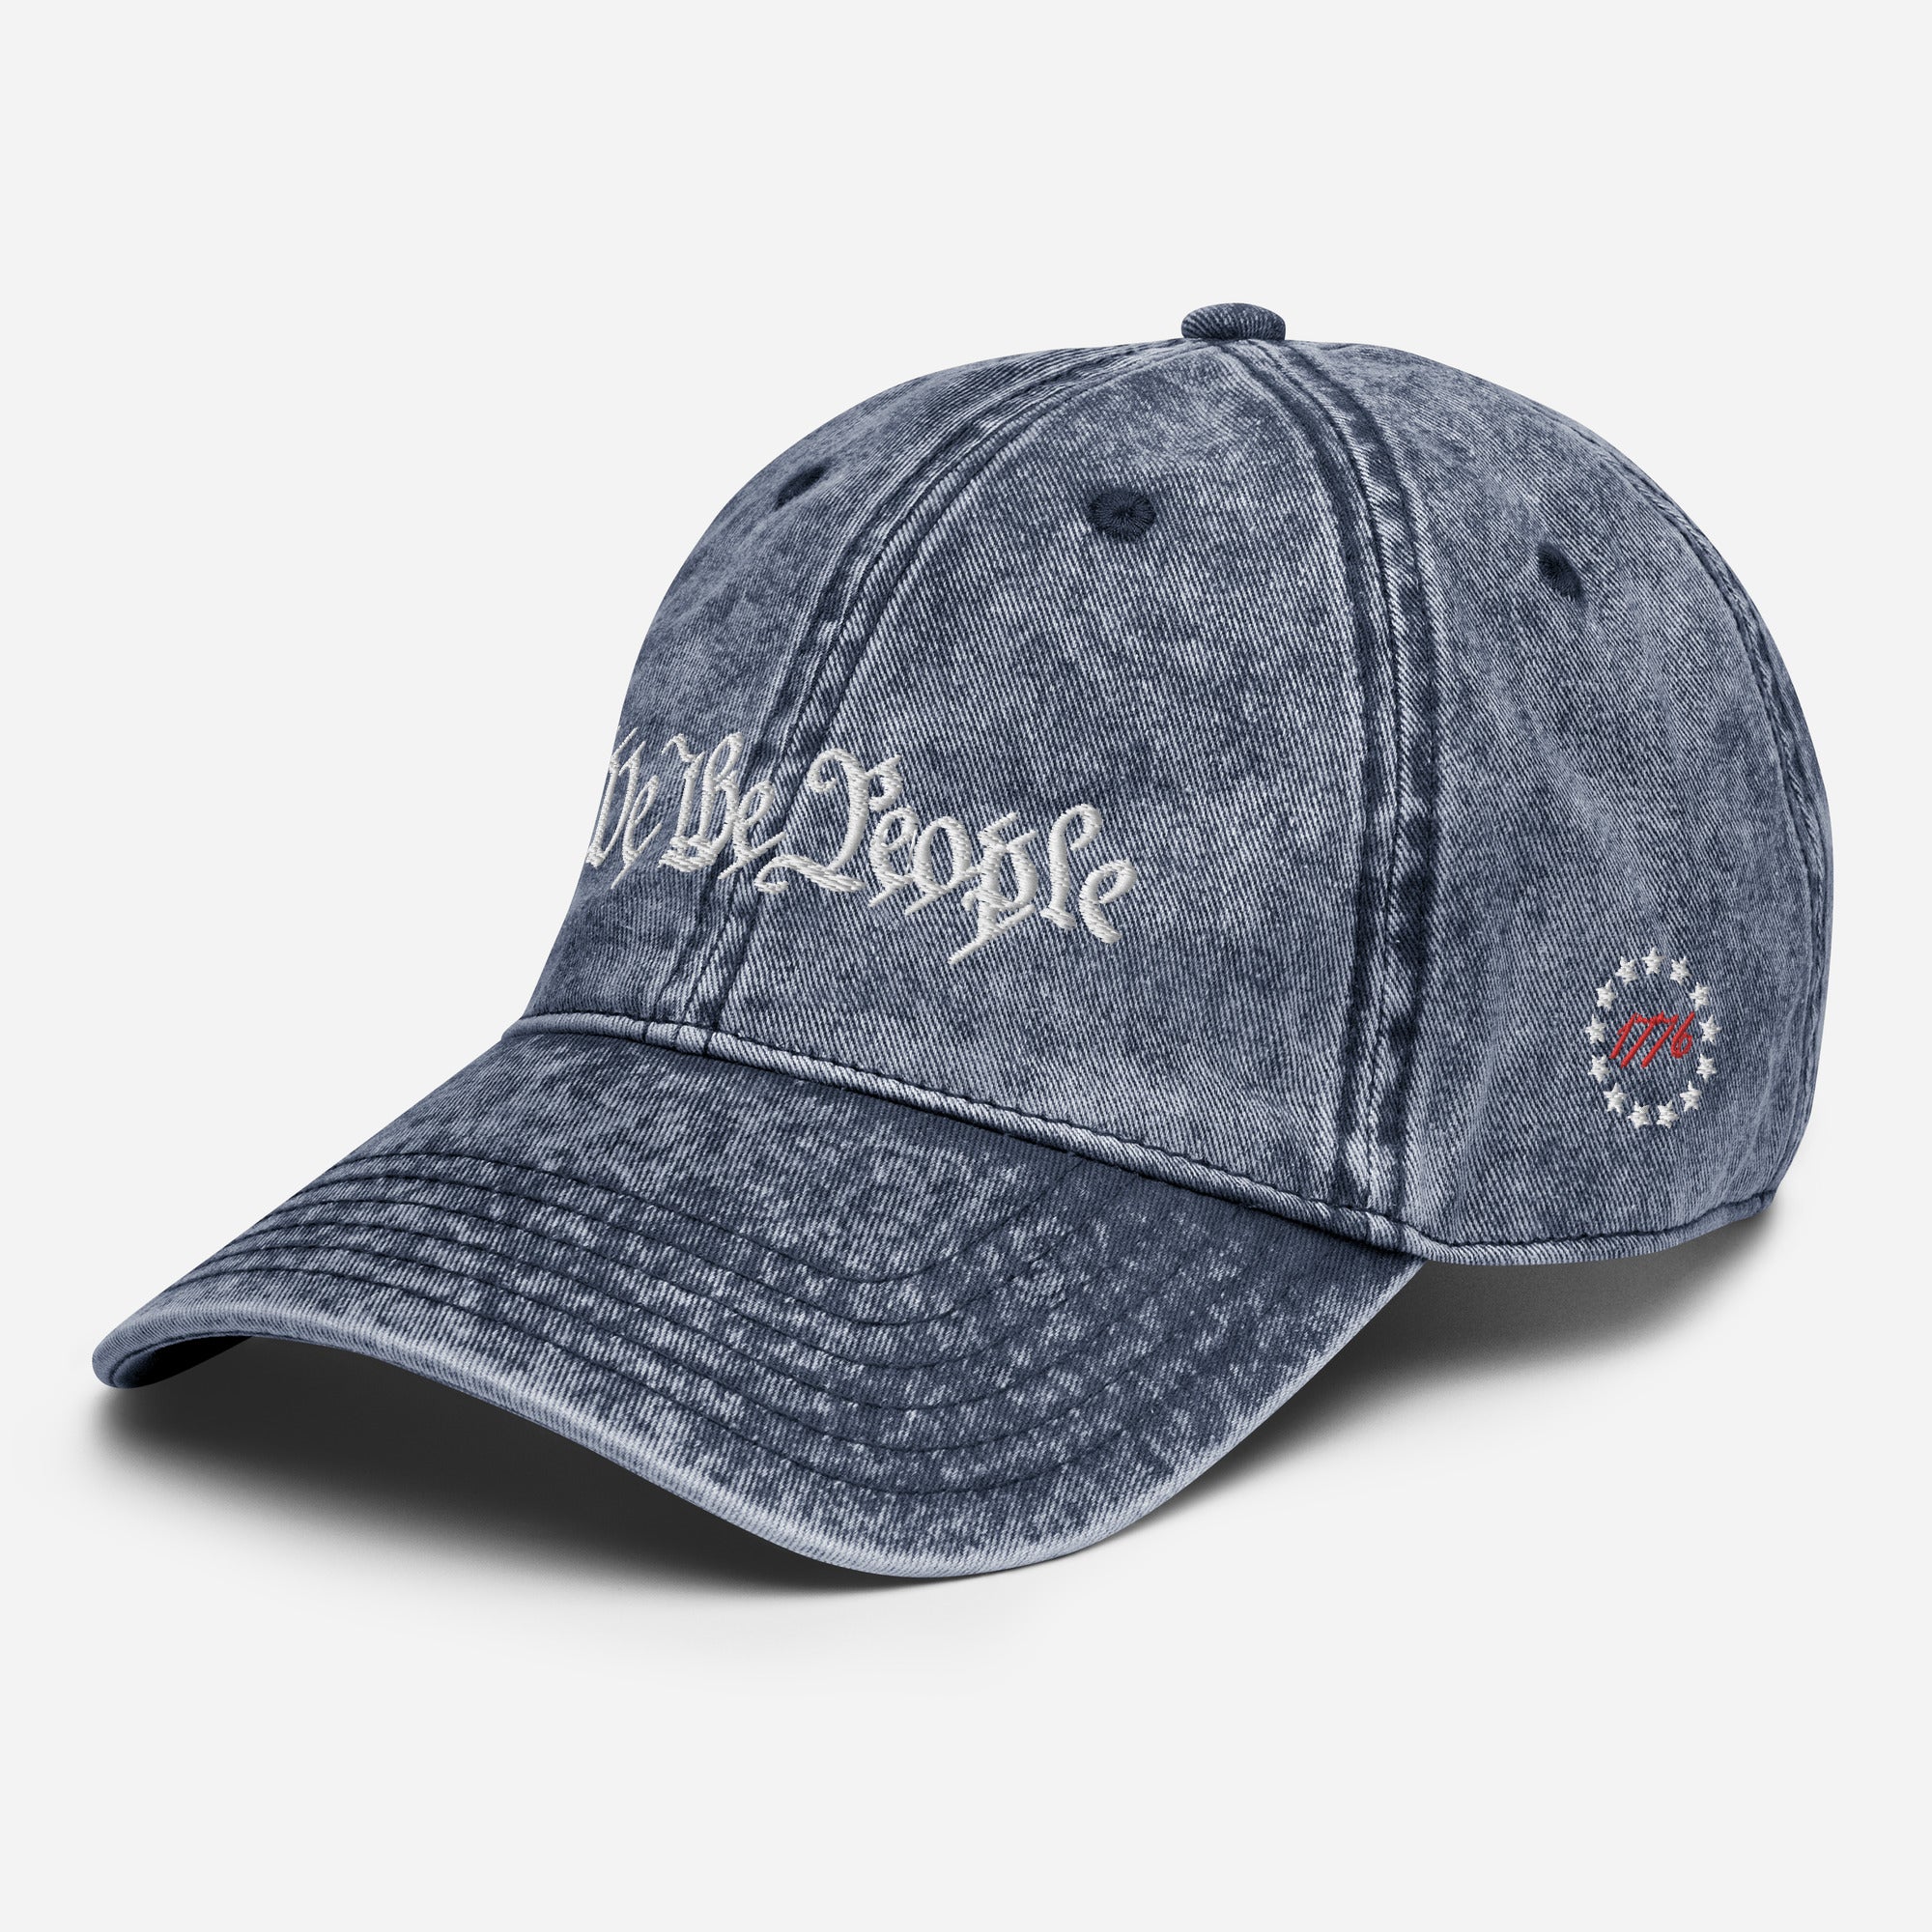 We The People Vintage Cotton Twill Cap